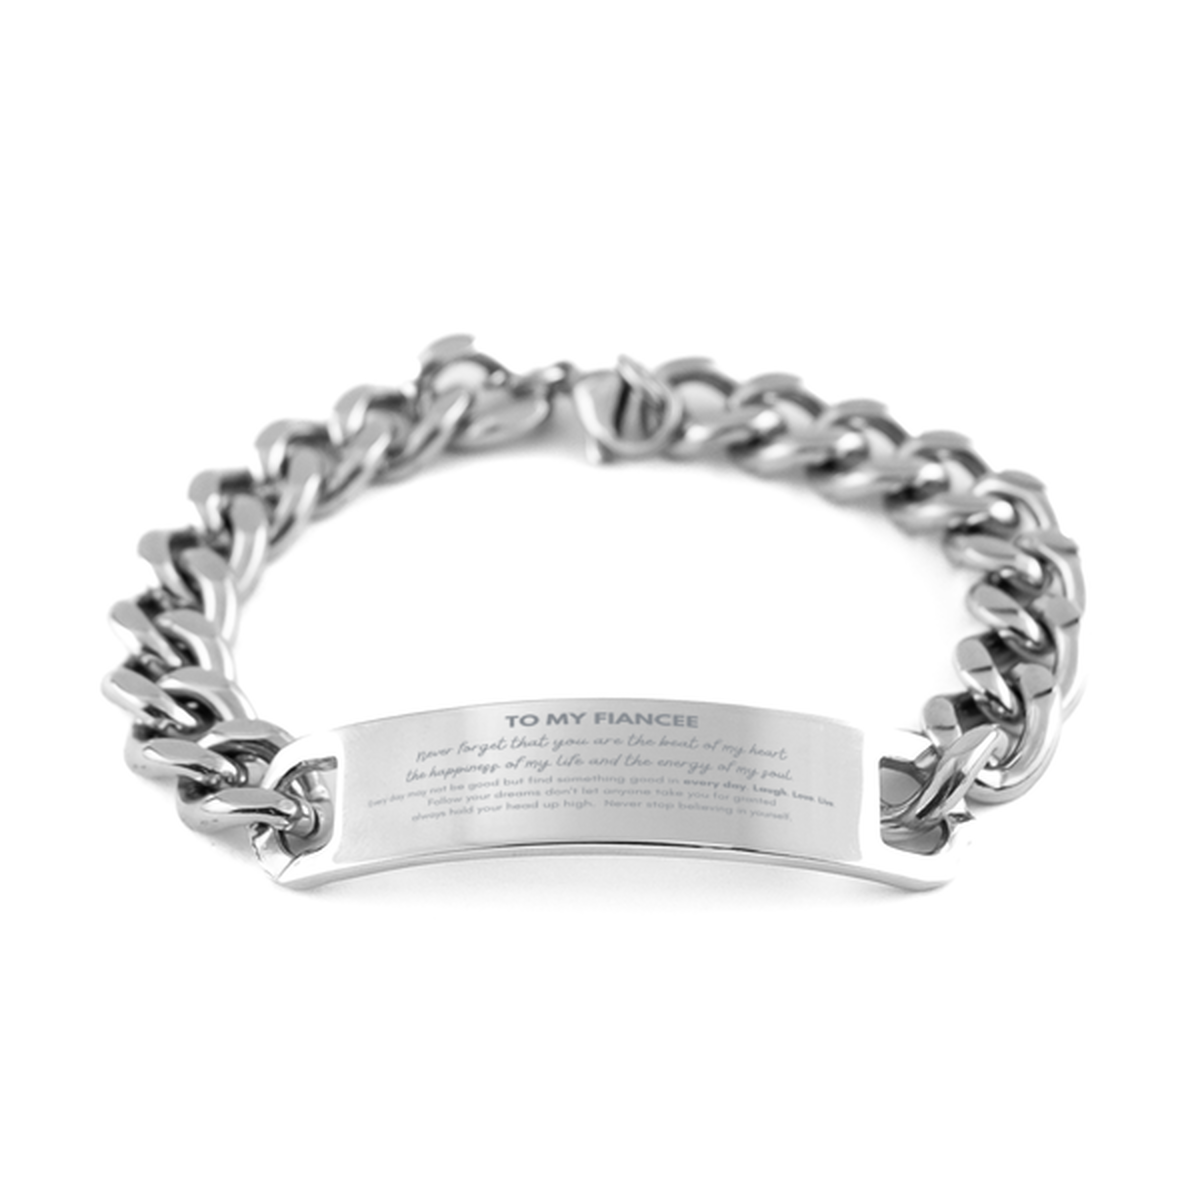 To My Fiancee Bracelet Gifts, Christmas Fiancee Cuban Chain Stainless Steel Bracelet Present, Birthday Unique Motivational For Fiancee, To My Fiancee Never forget that you are the beat of my heart the happiness of my life and the energy of my soul